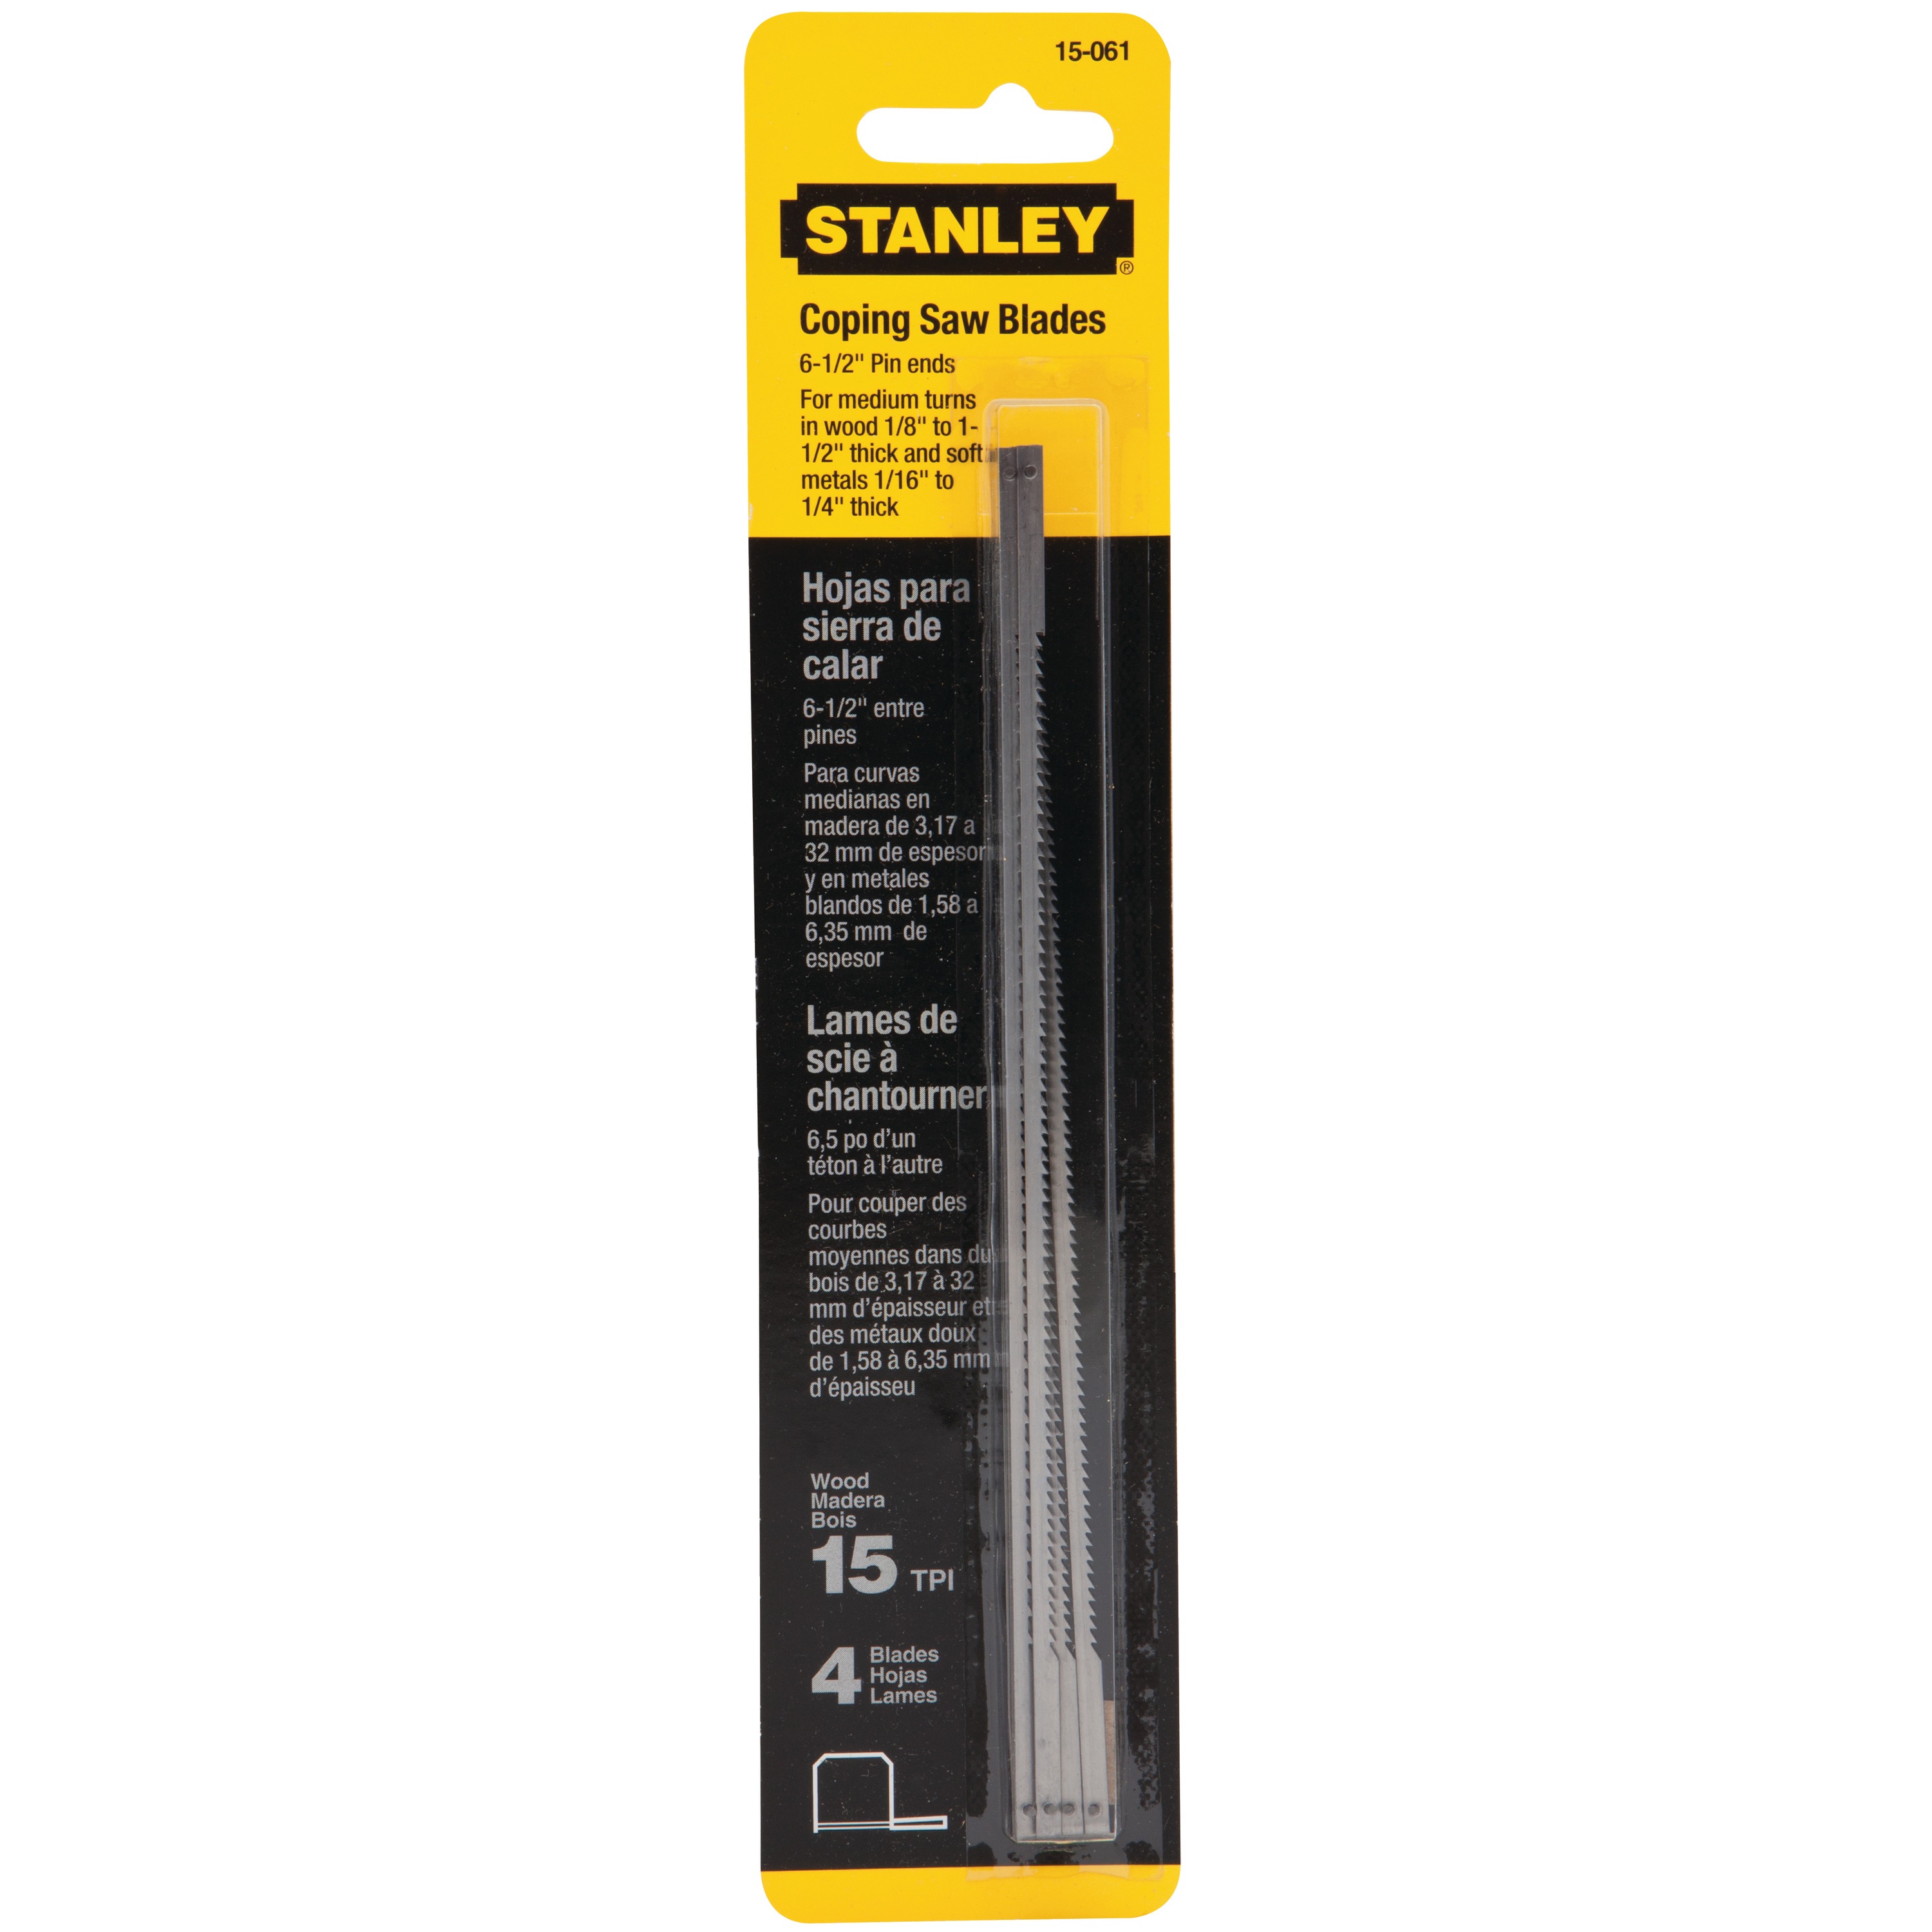 Stanley Tools - 4 pk 612 in x 15 TPI Coping Saw Blades - 15-061